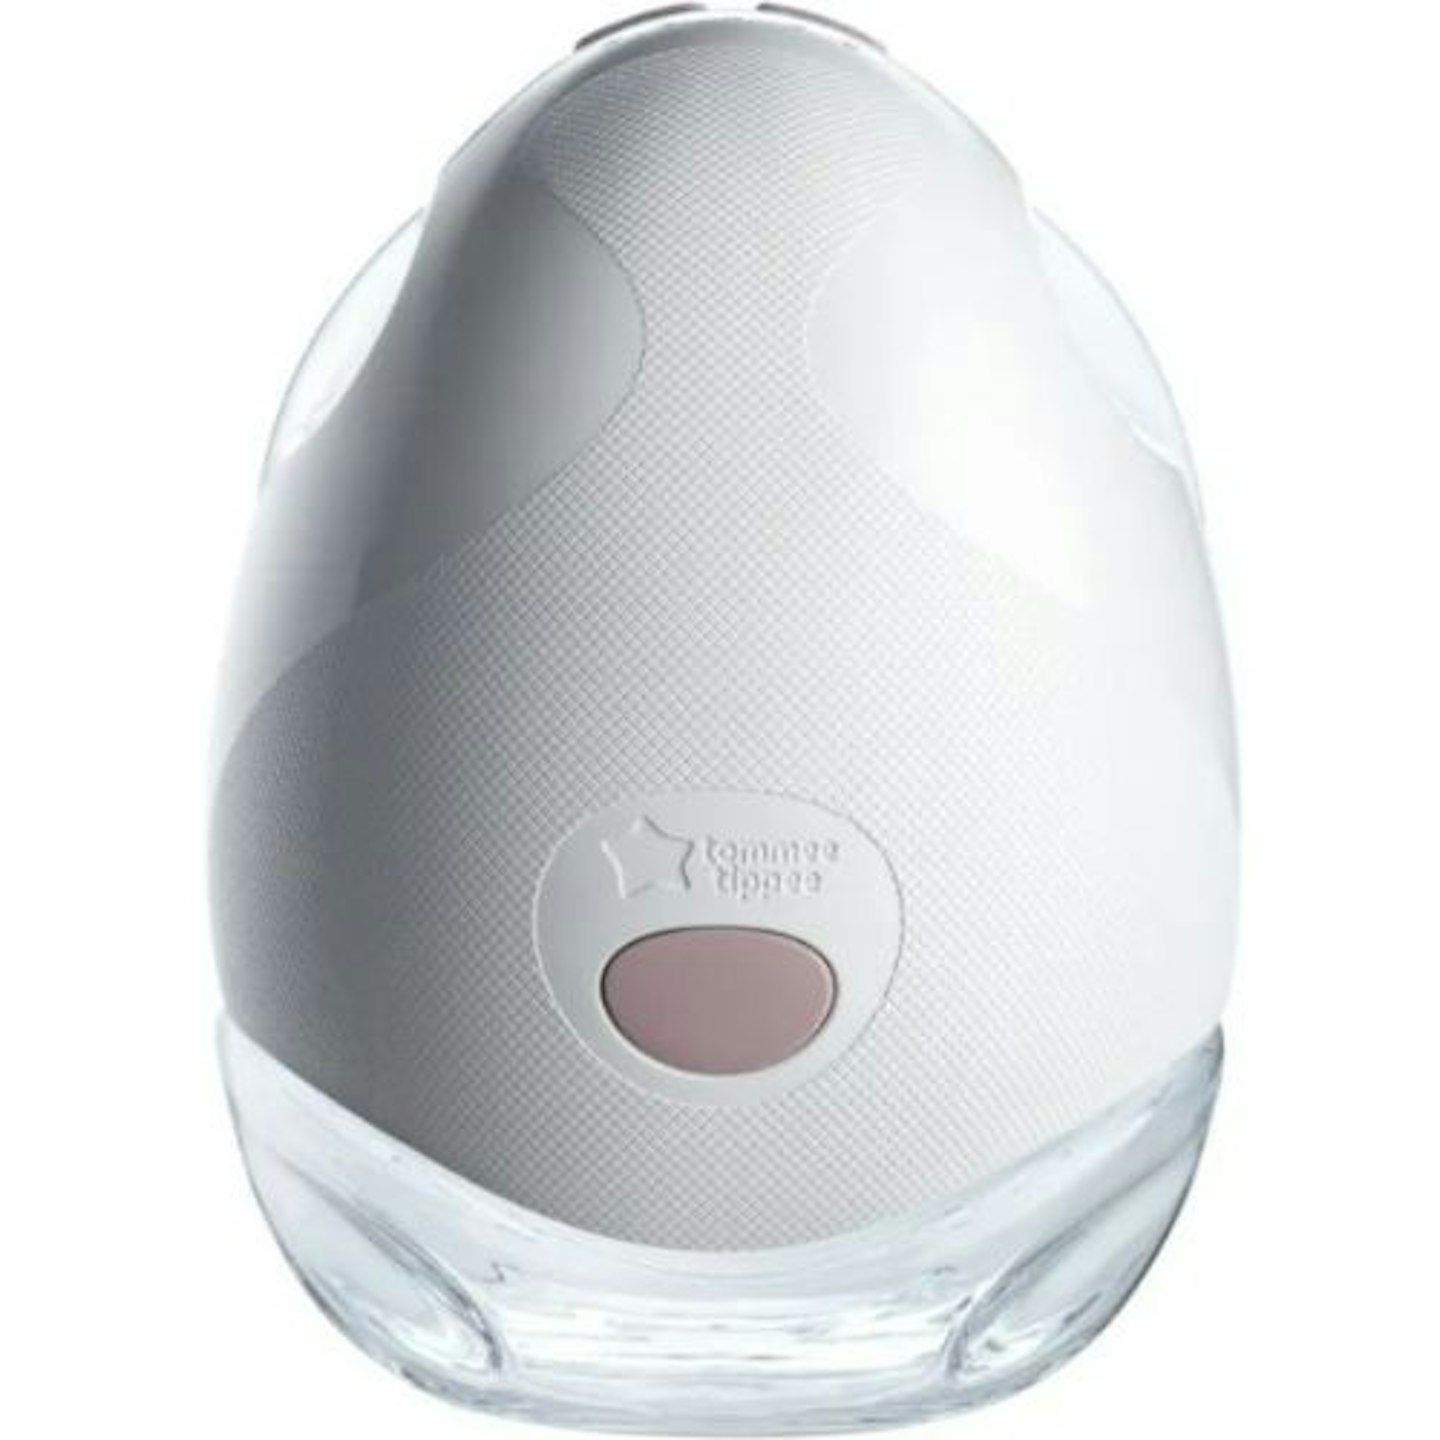 Tommee Tippee Made for Me Wearable Breast Pump